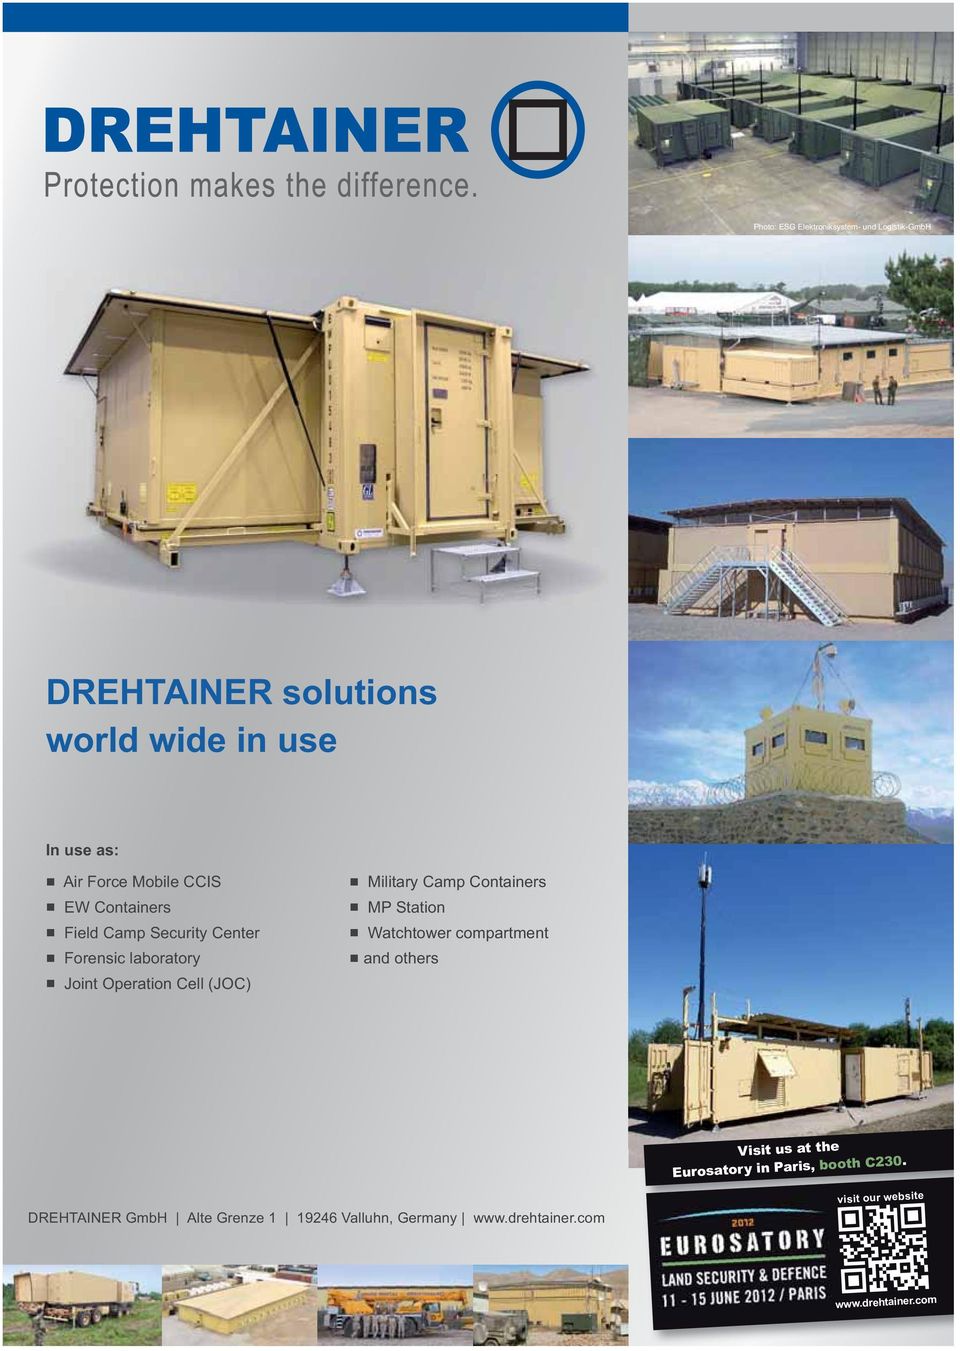 Camp Containers MP Station Watchtower compartment and others Visit us at the Eurosatory in Paris, booth C230.